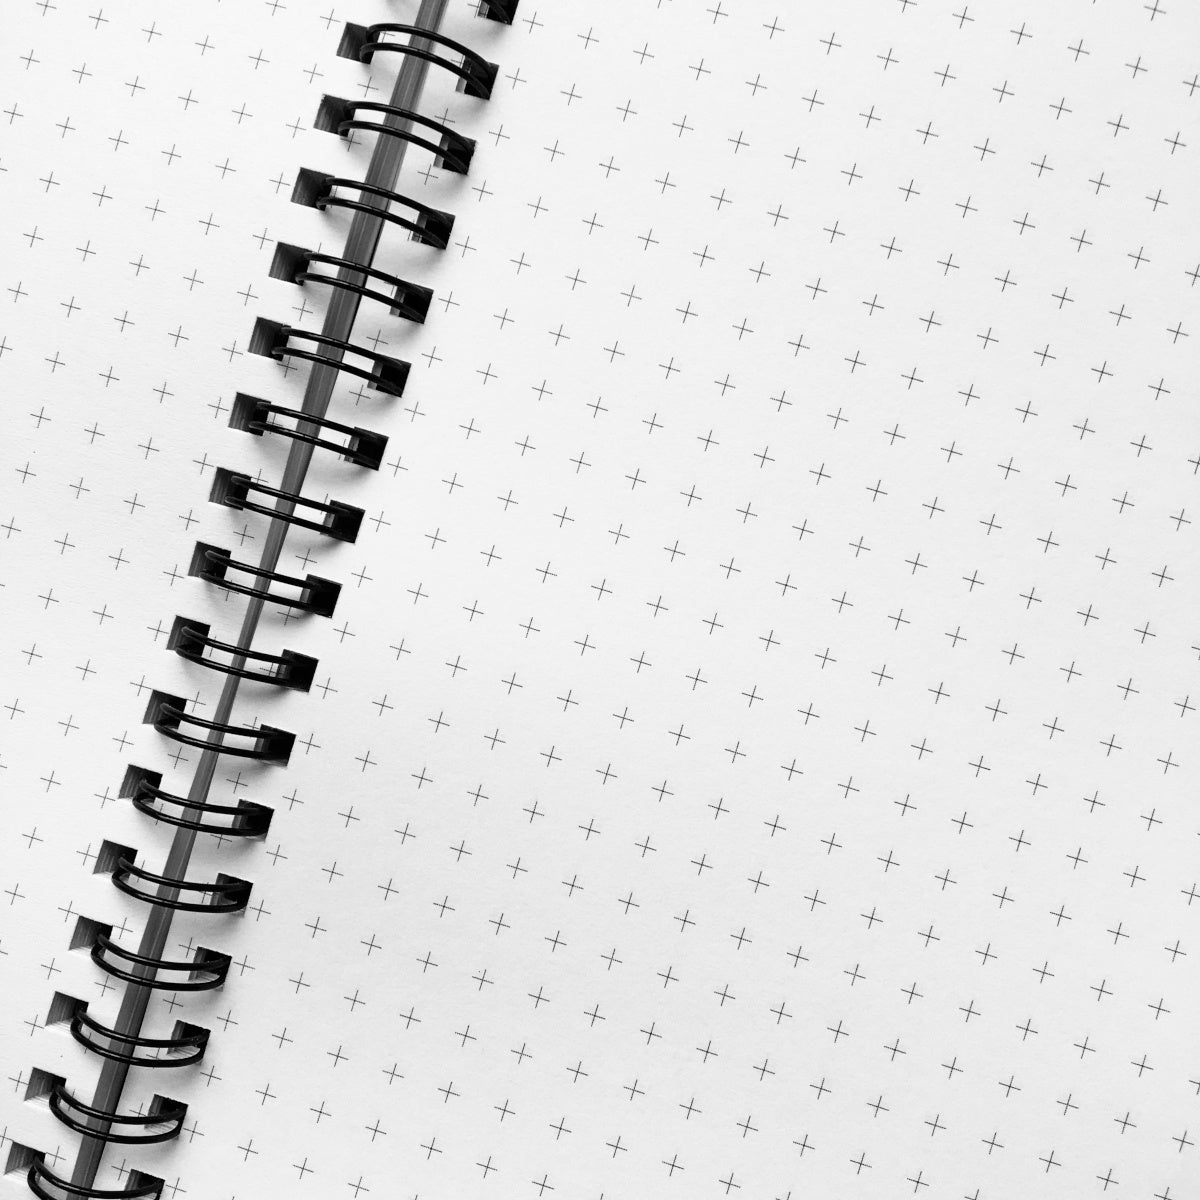 A close up picture of the grid graph paper option, showing the black spiral wire binding and little crosses covering the white paper